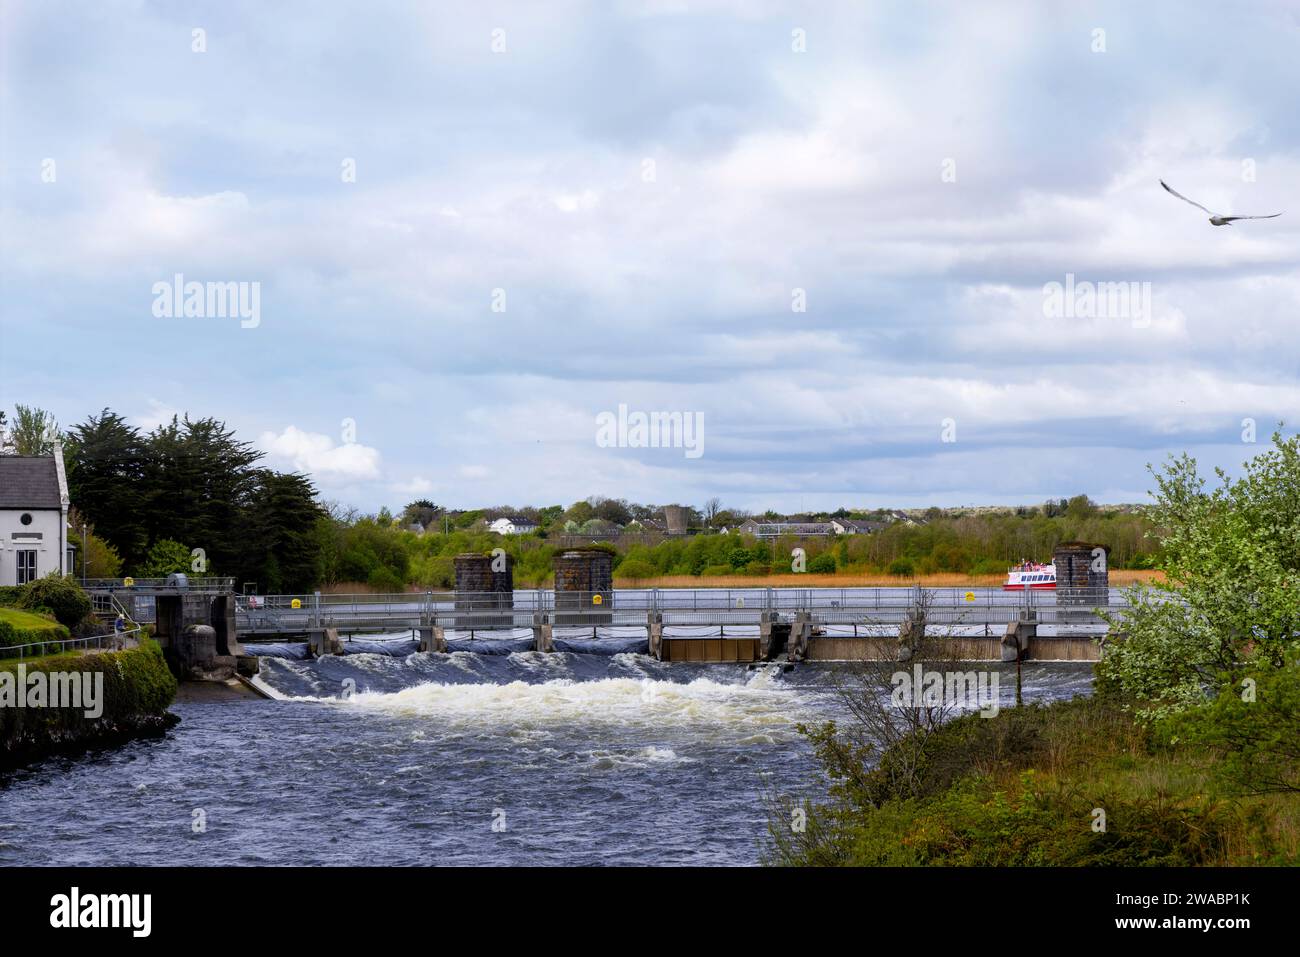 Fisherman on footpath along River Corrib, a popular area for flyfishing, Galway, County Galway, Republic of Ireland. Stock Photo